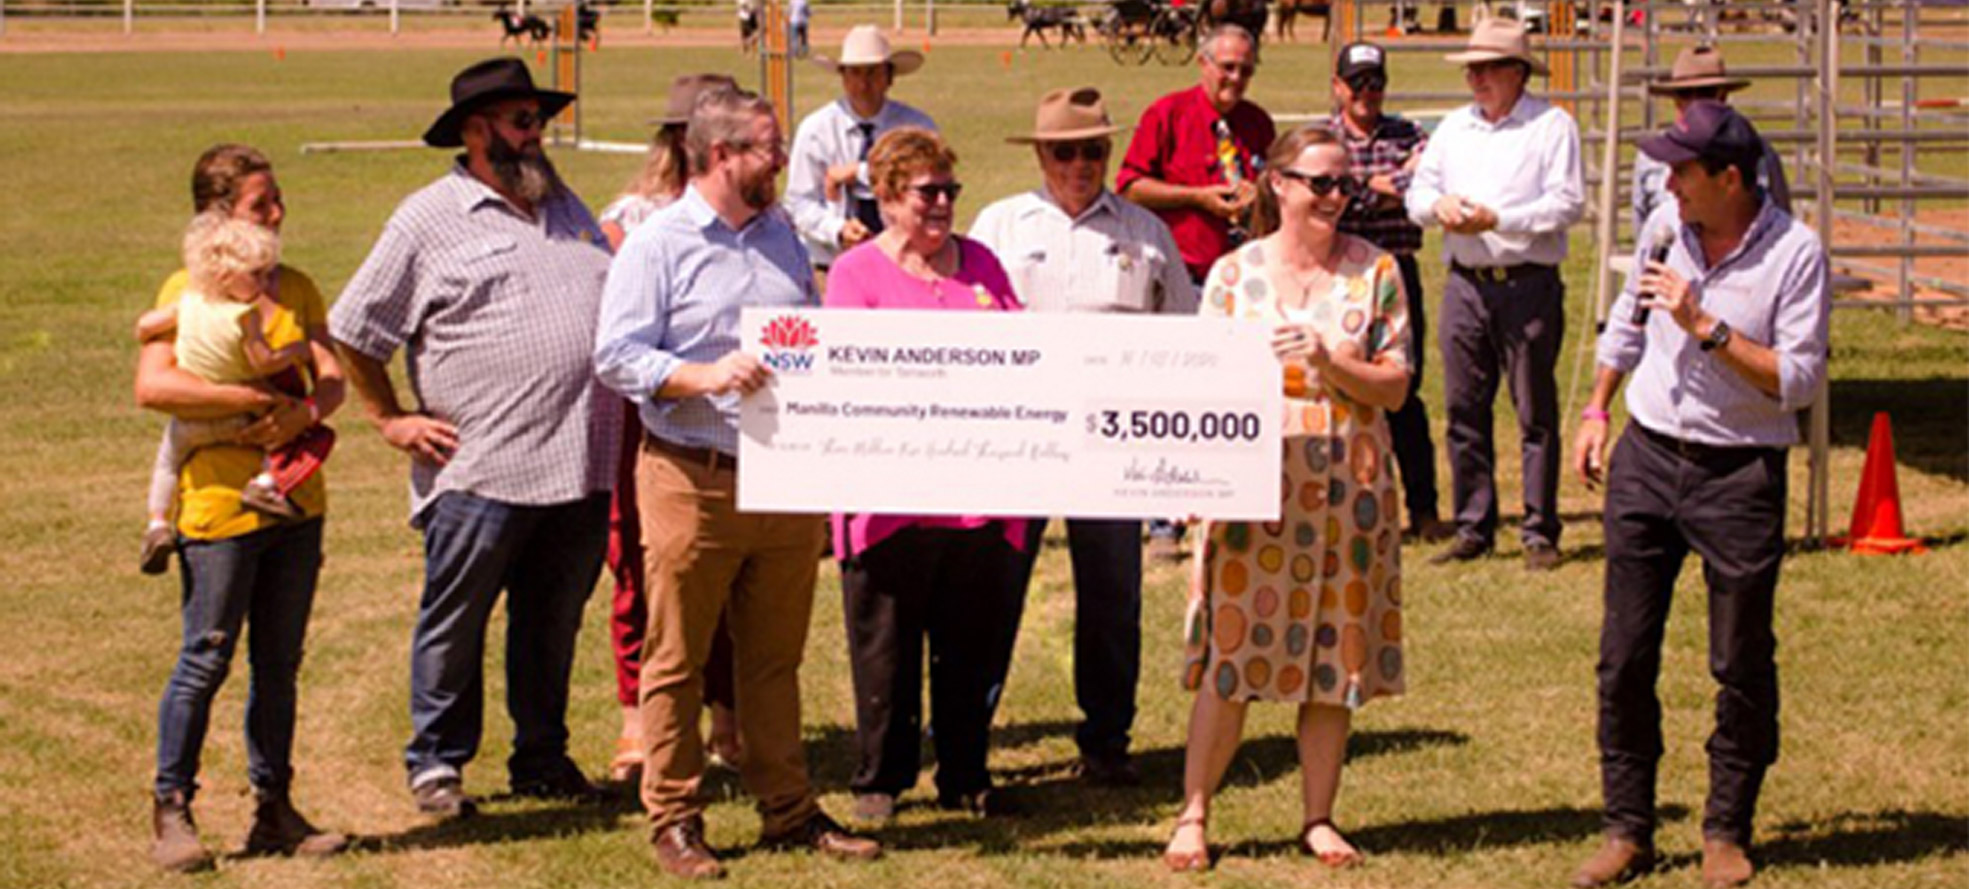 Member for Tamworth Kevin Anderson presenting cheque for $3.5 Million dollars to Manilla Community Renewable Energy Inc. committee and supporters at the Manilla Show 2020.